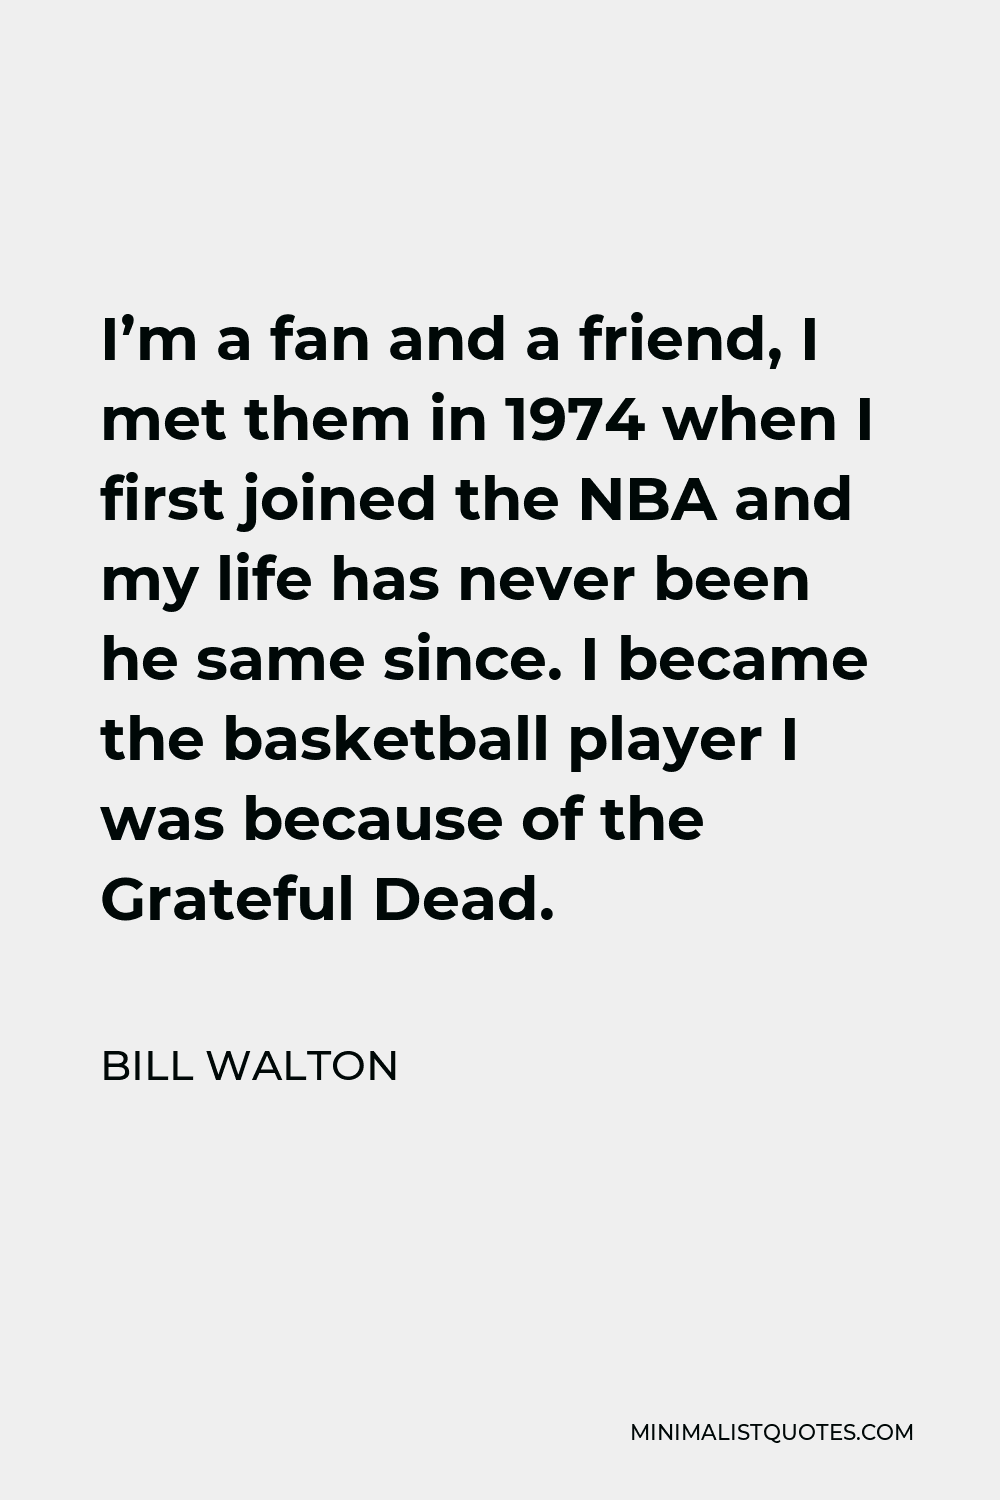 Bill Walton Quote - I’m a fan and a friend, I met them in 1974 when I first joined the NBA and my life has never been he same since. I became the basketball player I was because of the Grateful Dead.